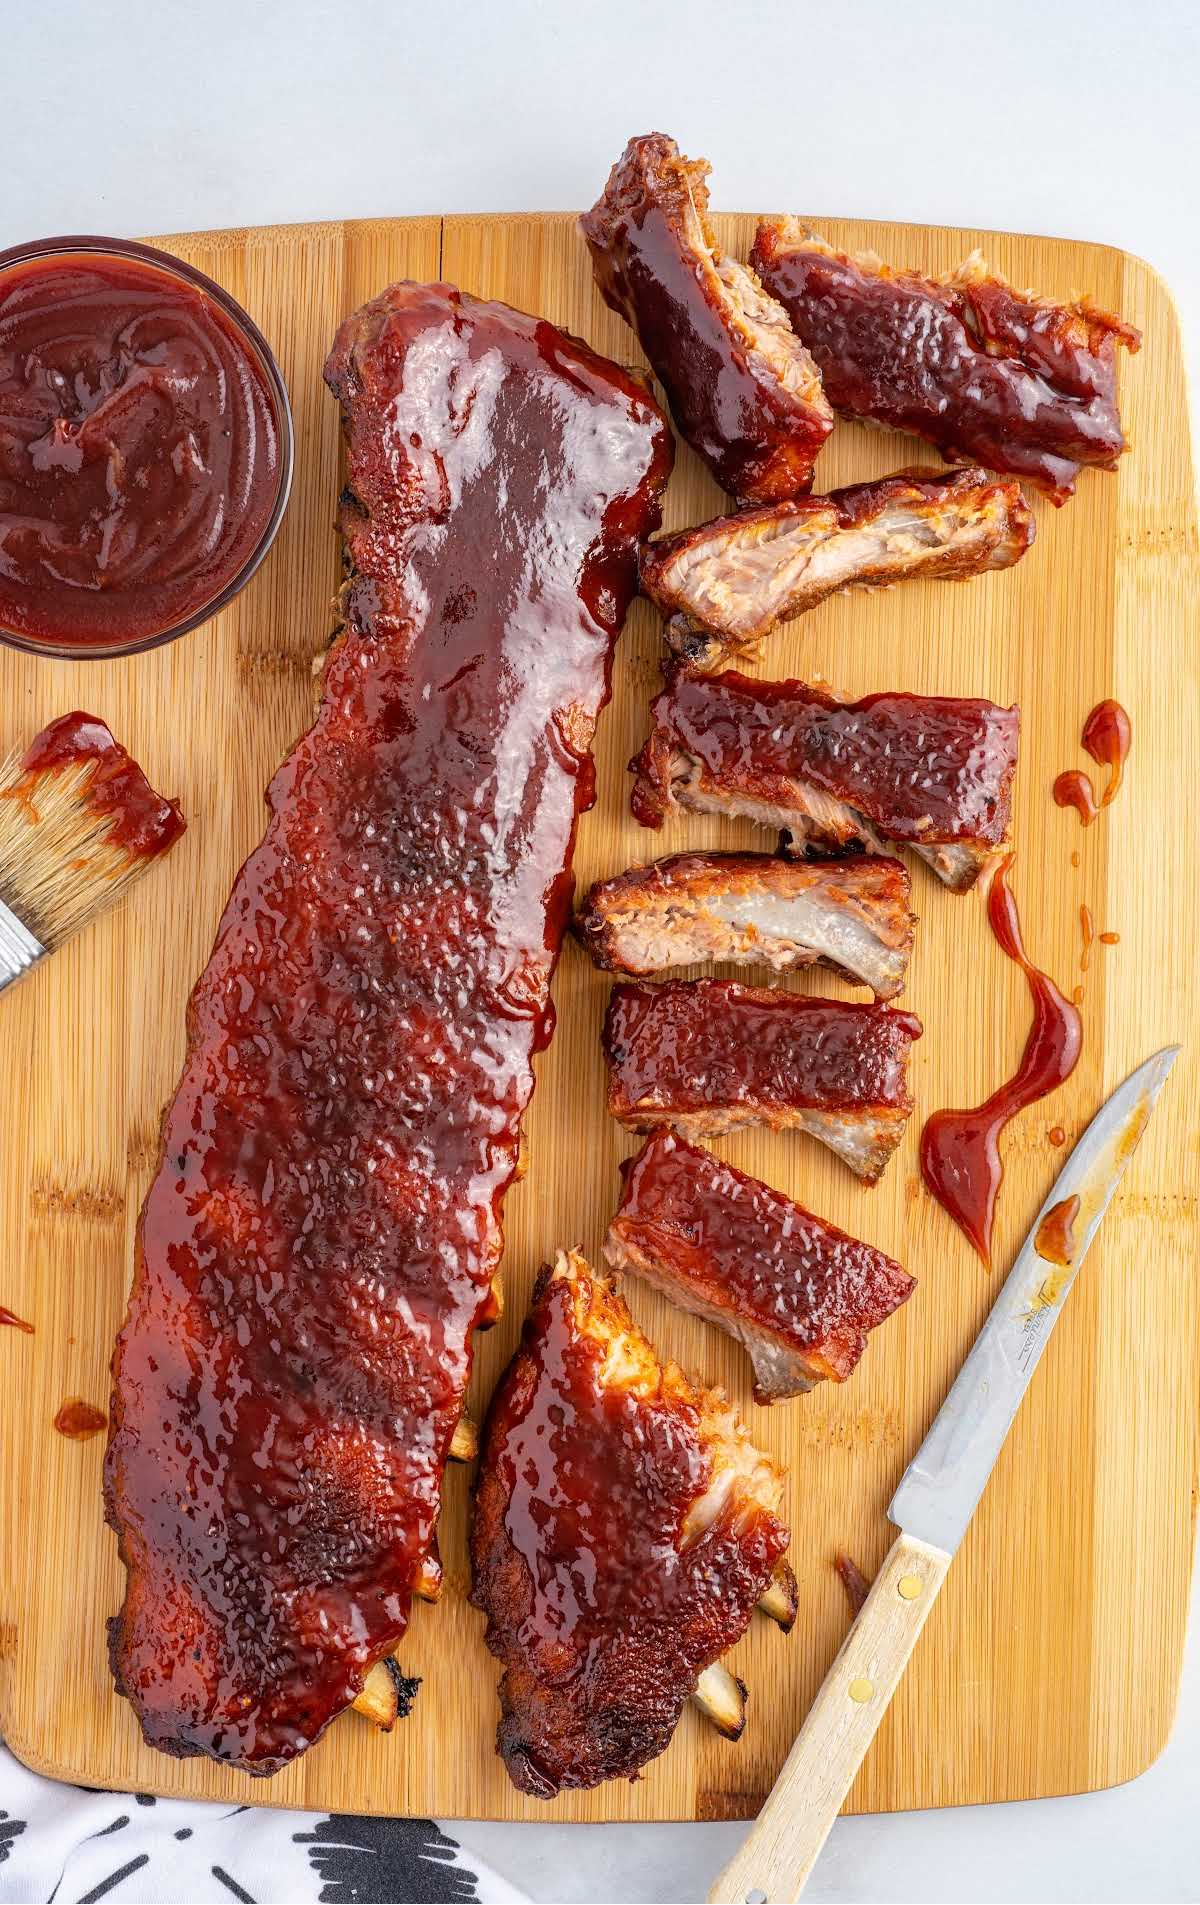 Food on a wooden table, with Ribs